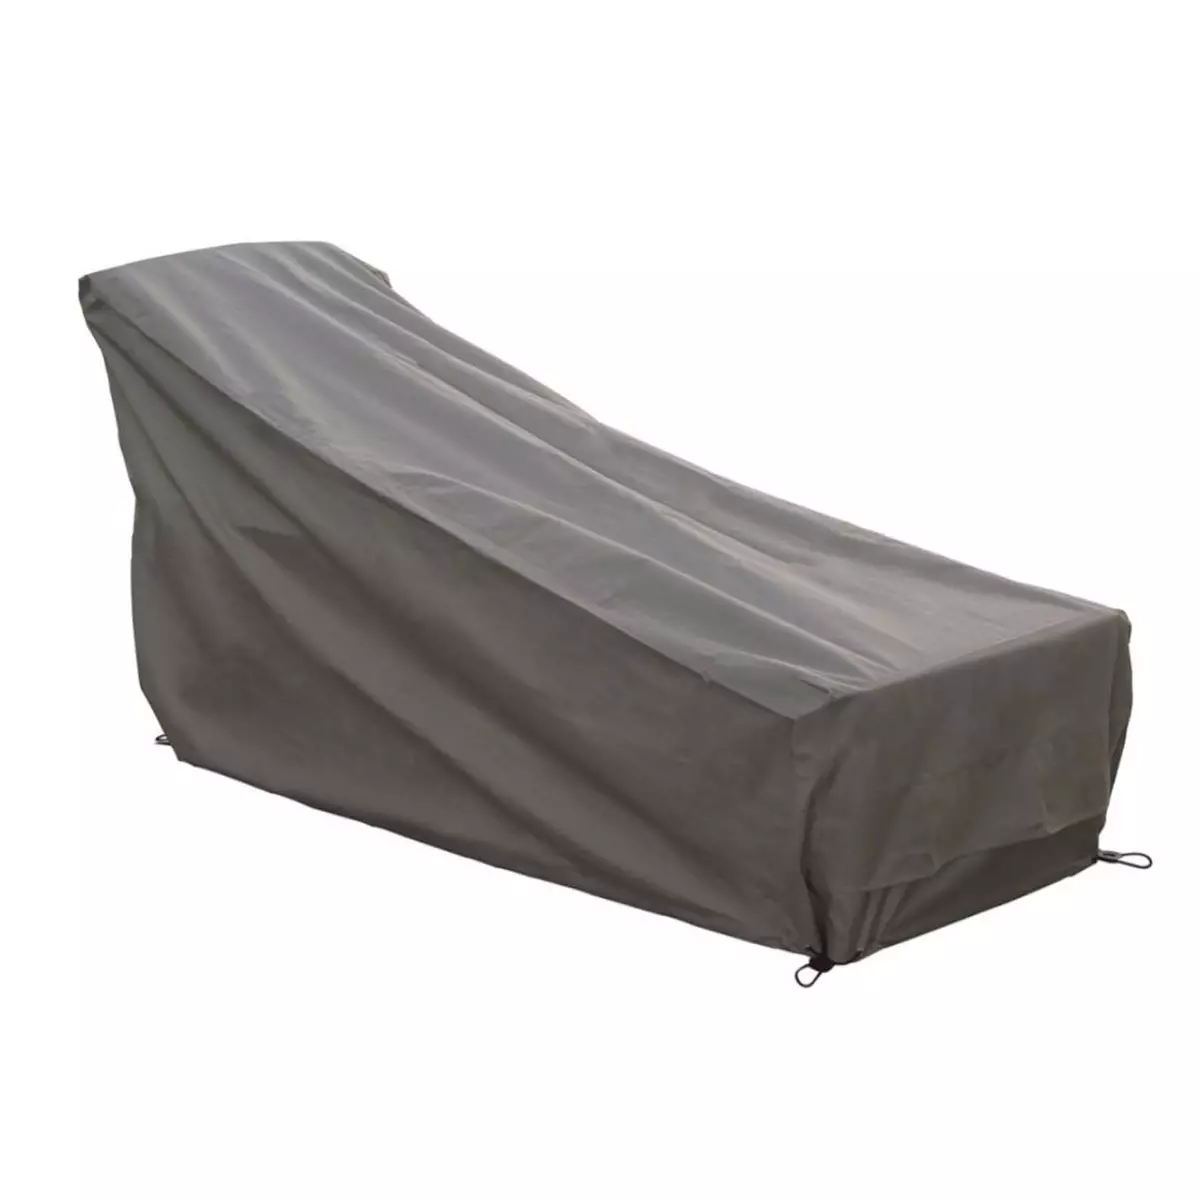 Protective Cover - Wicker Sunlounger - image 1